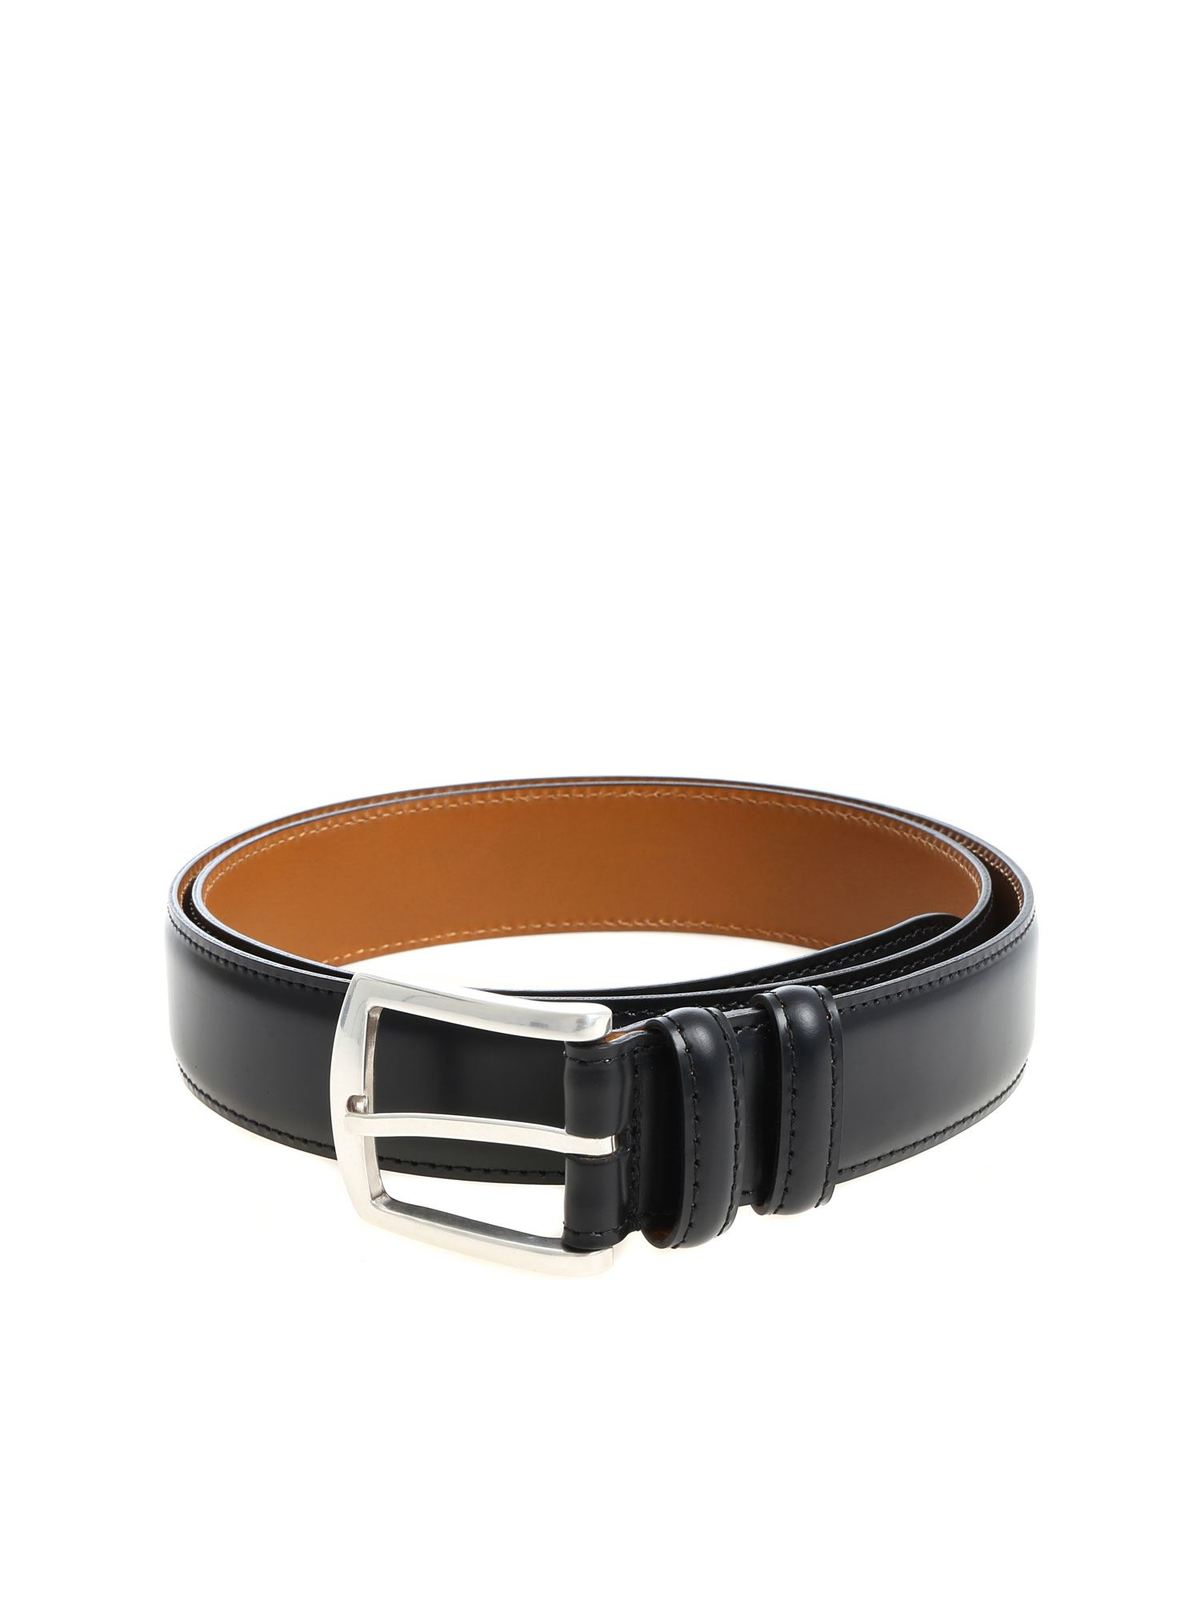 Andrea D'amico Black Leather Belt